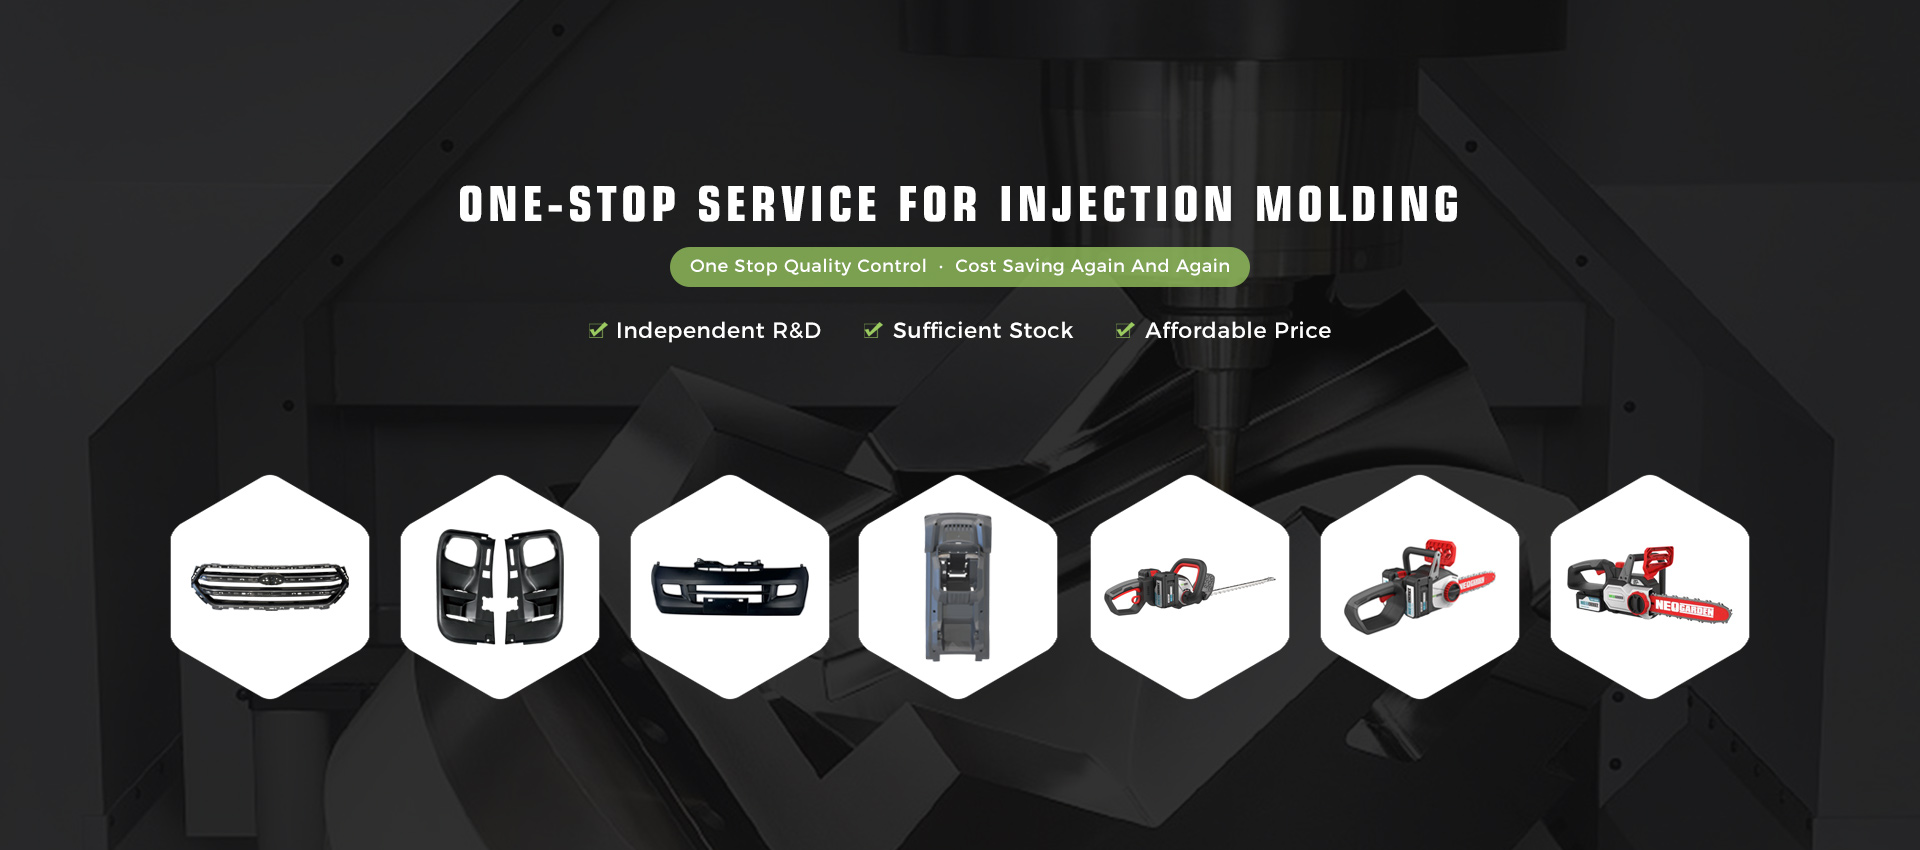 One-stop Service For Injection Molding